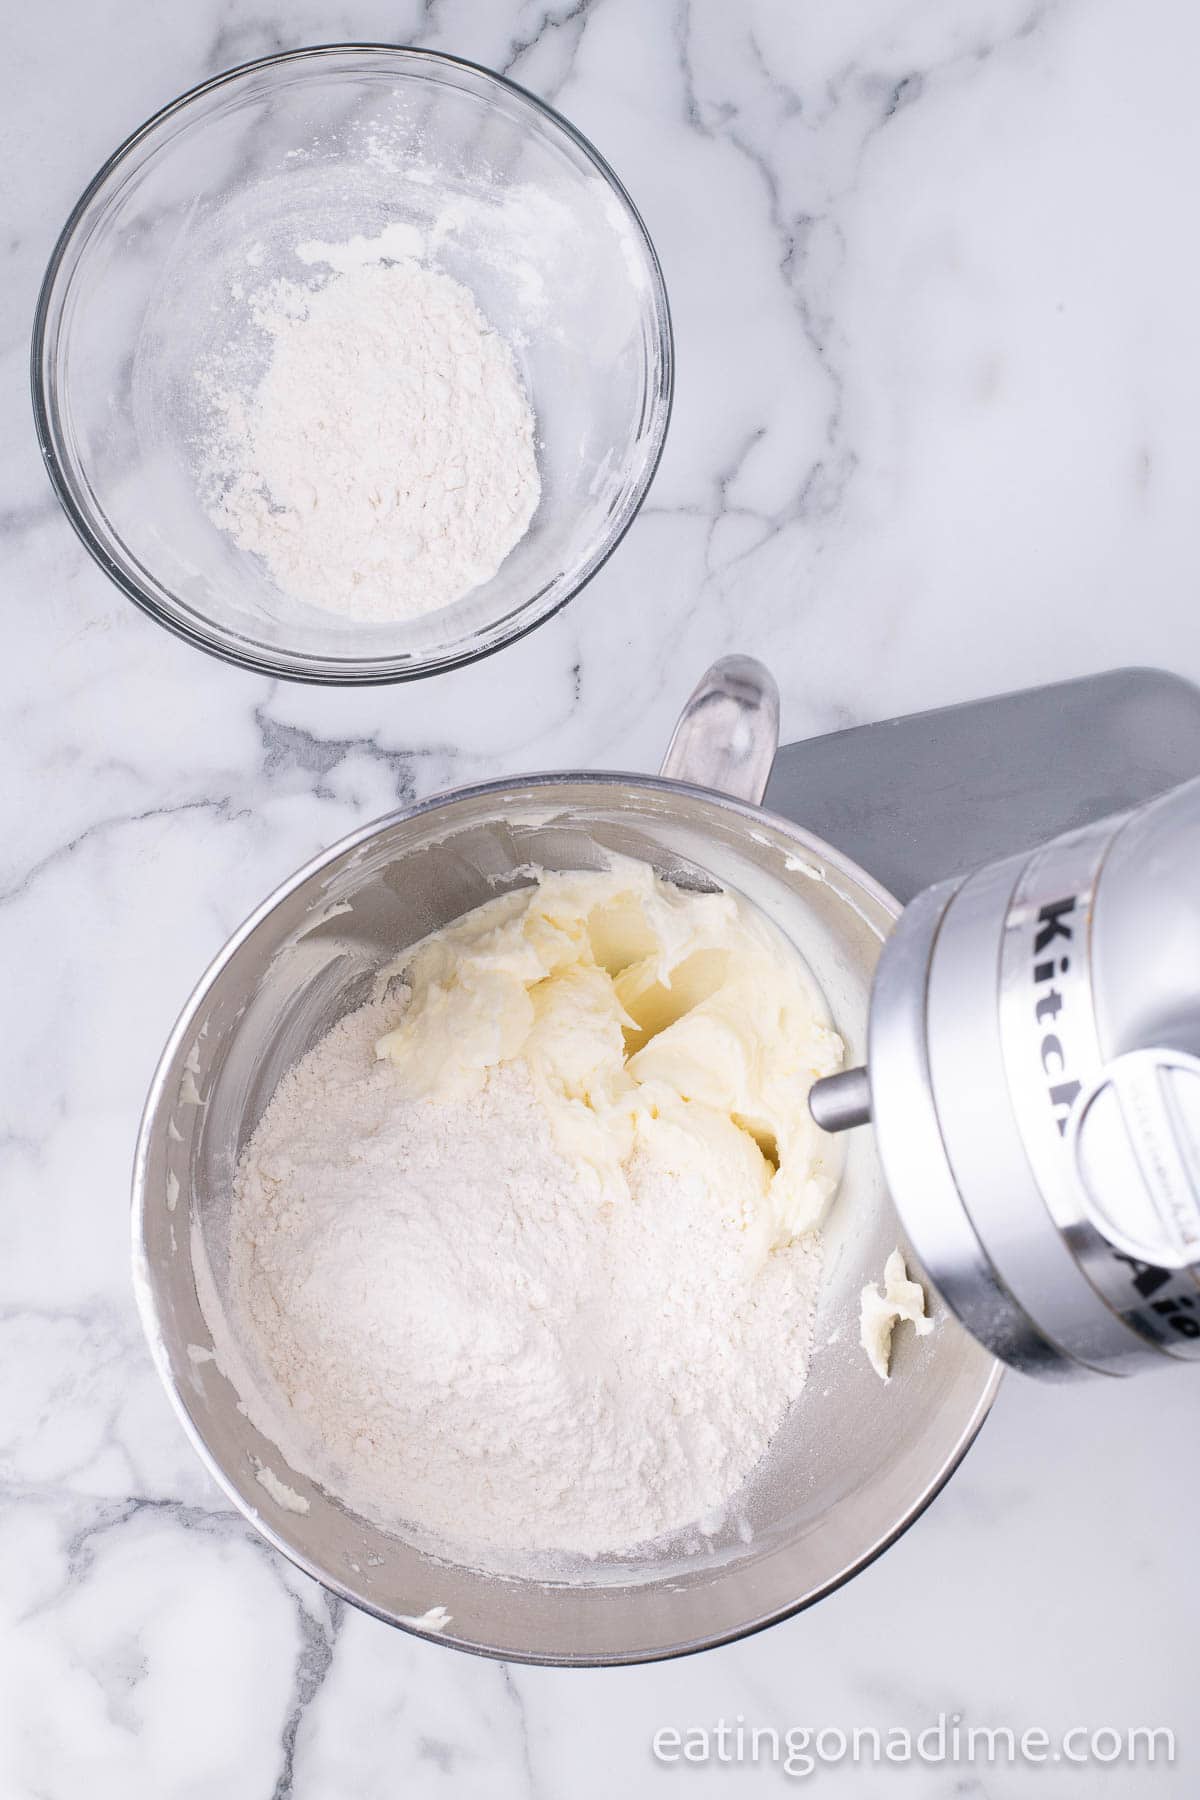 Adding the flour to the butter mixture in a stand mixer bowl